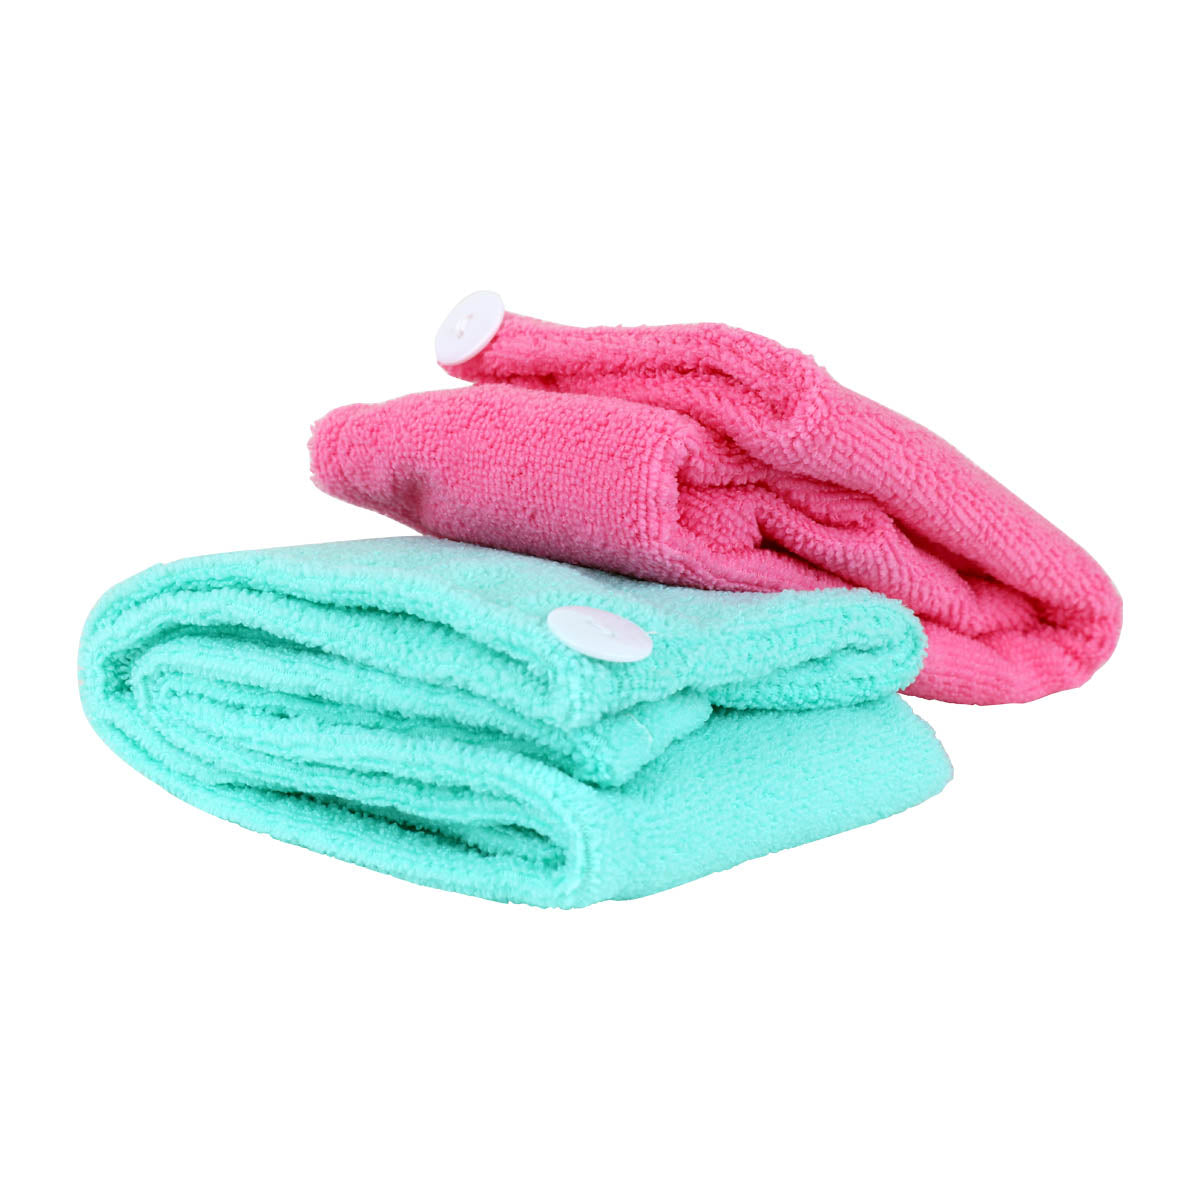 Relaxus Beauty Twist & Dry Quick Dry Hair Towel 2 Pack